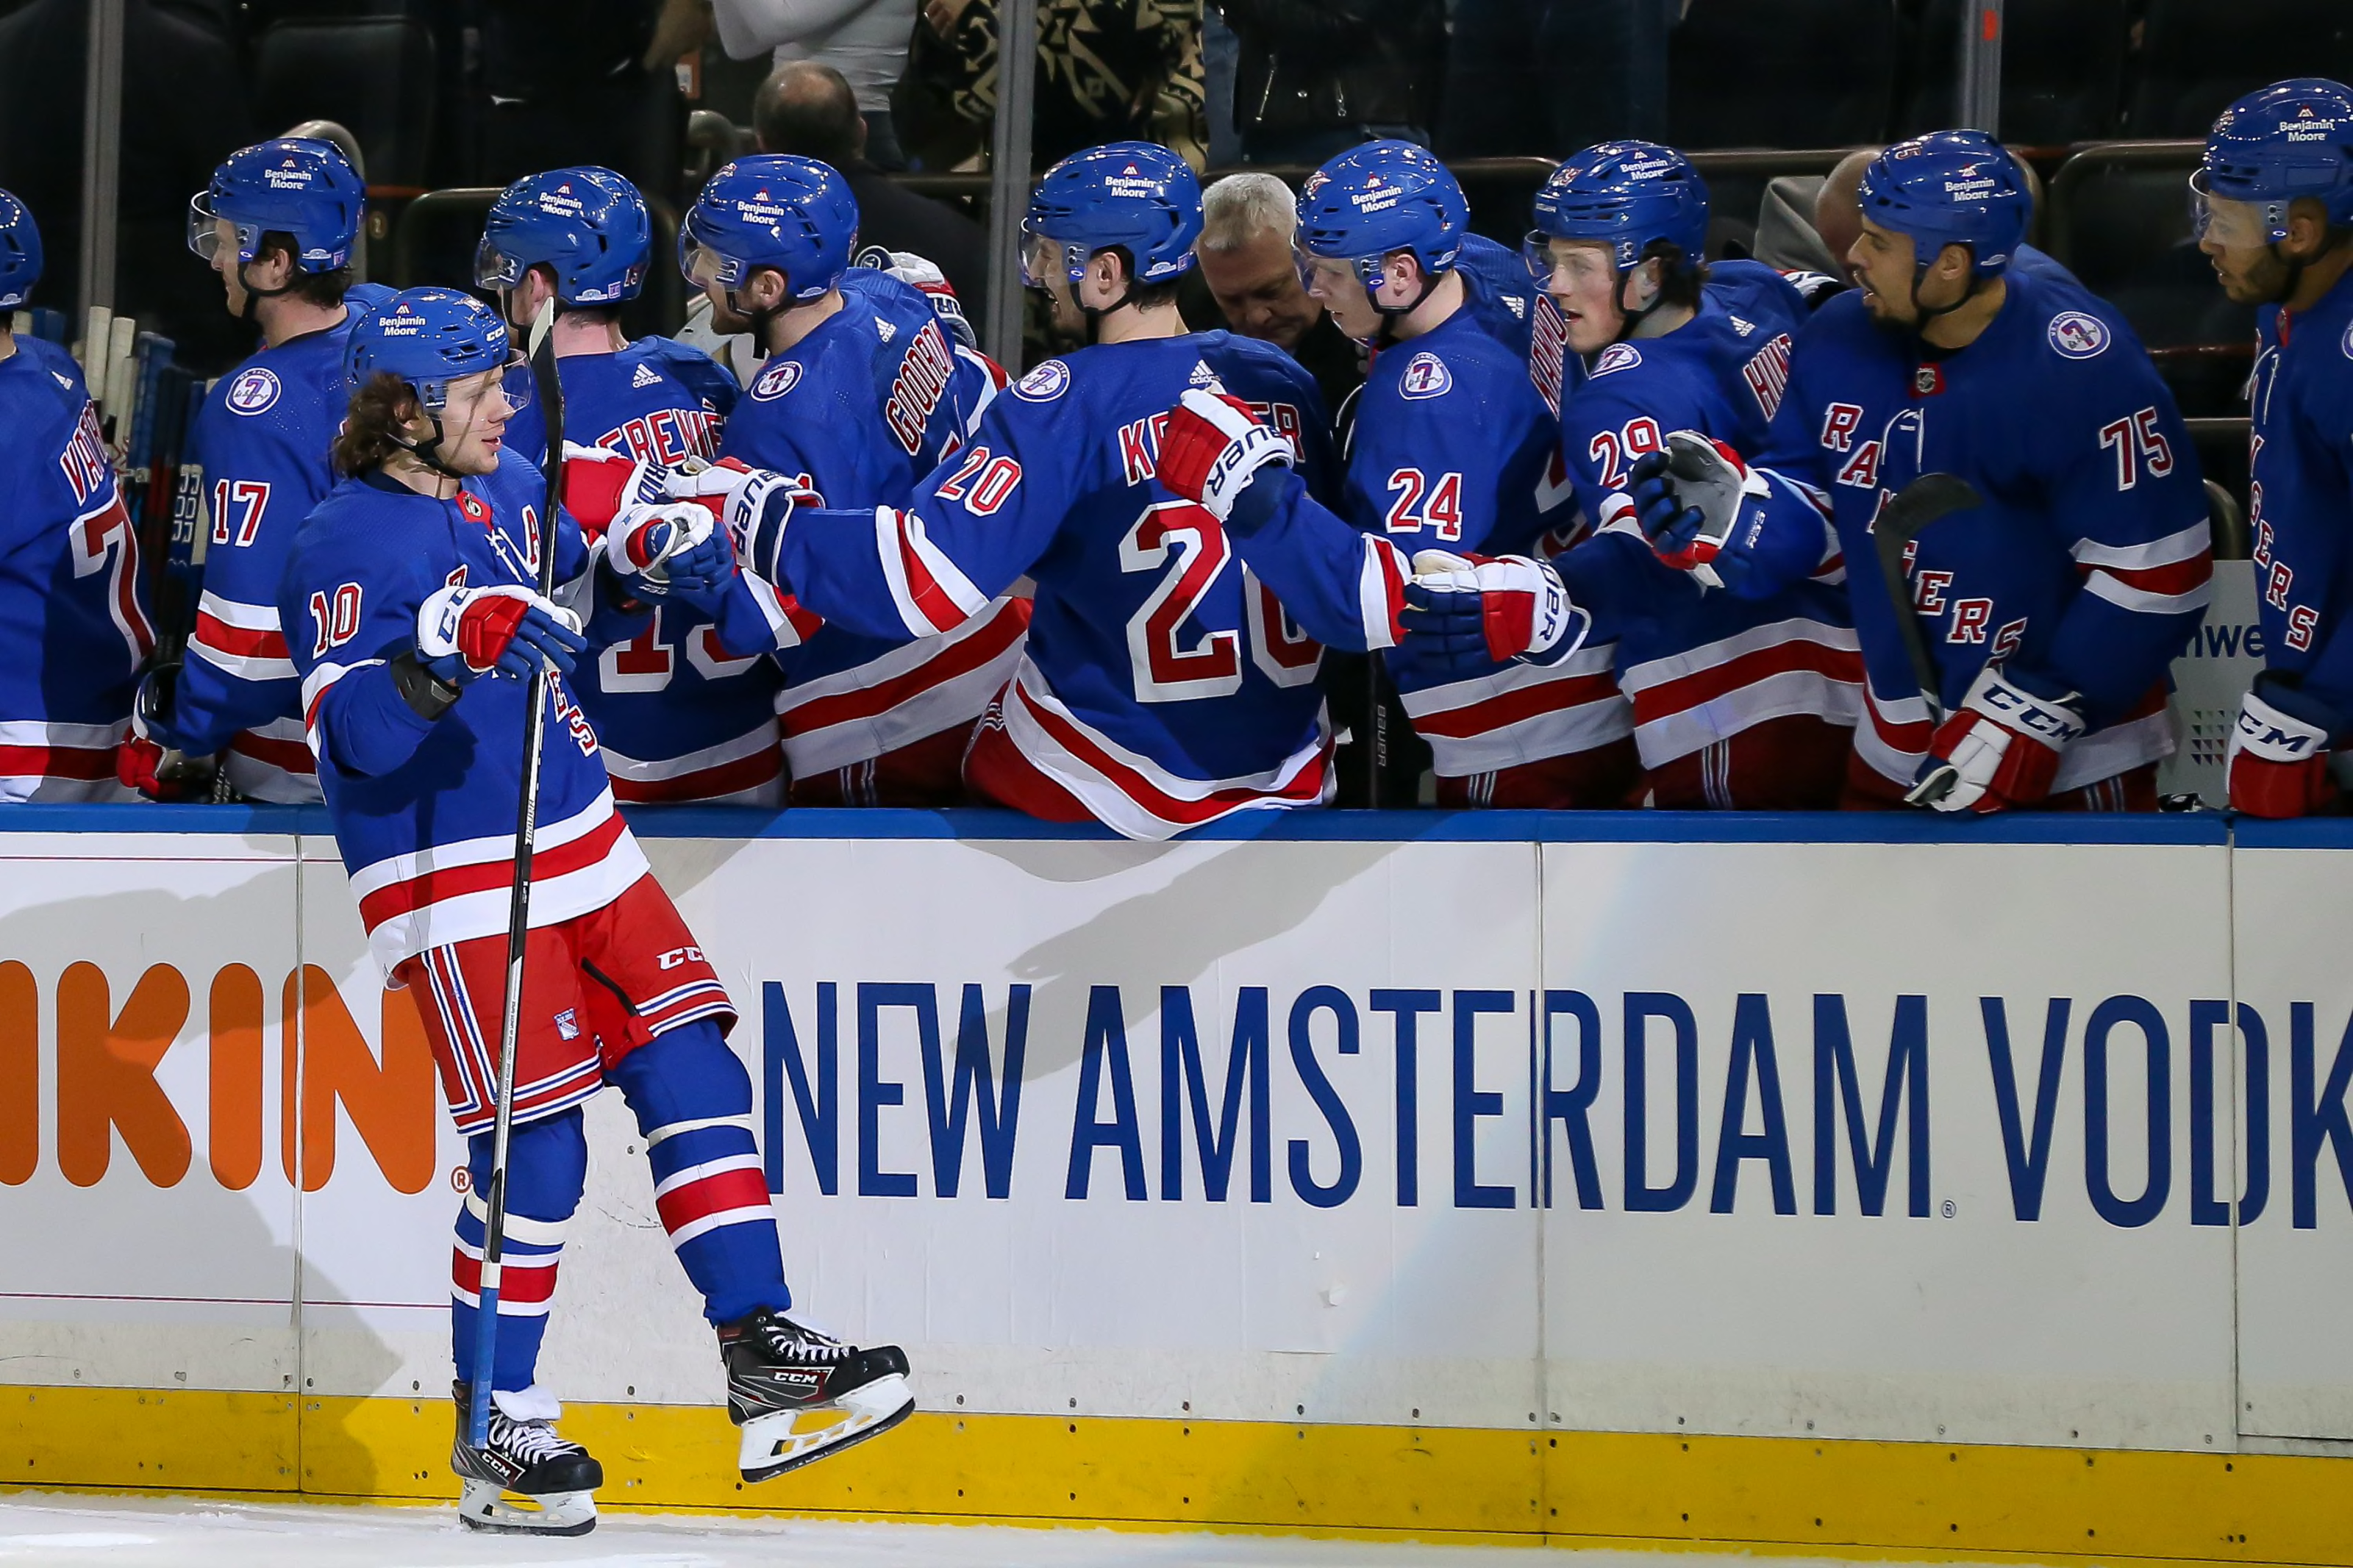 Bread and Better, Panarin Celebrates Birthday with Ranger Weekend